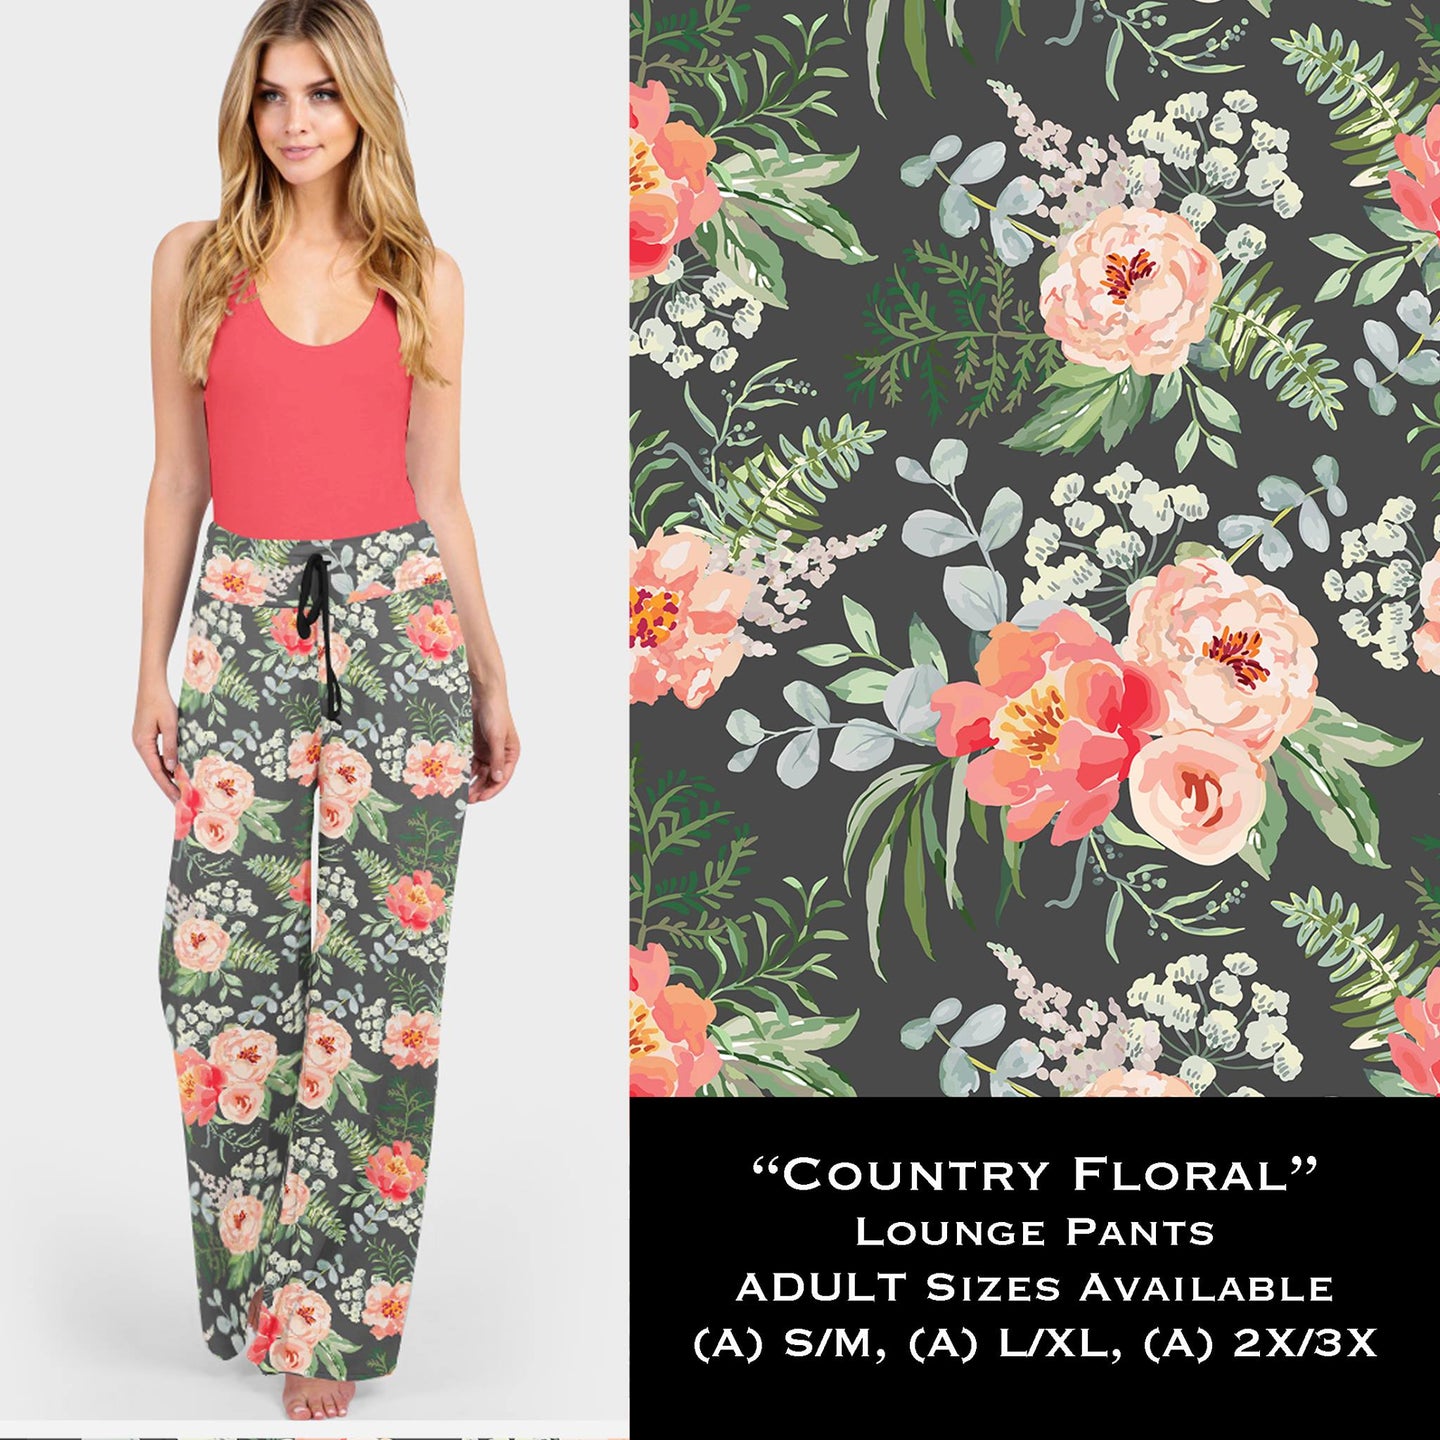 COUNTRY FLORAL LOUNGE PANTS